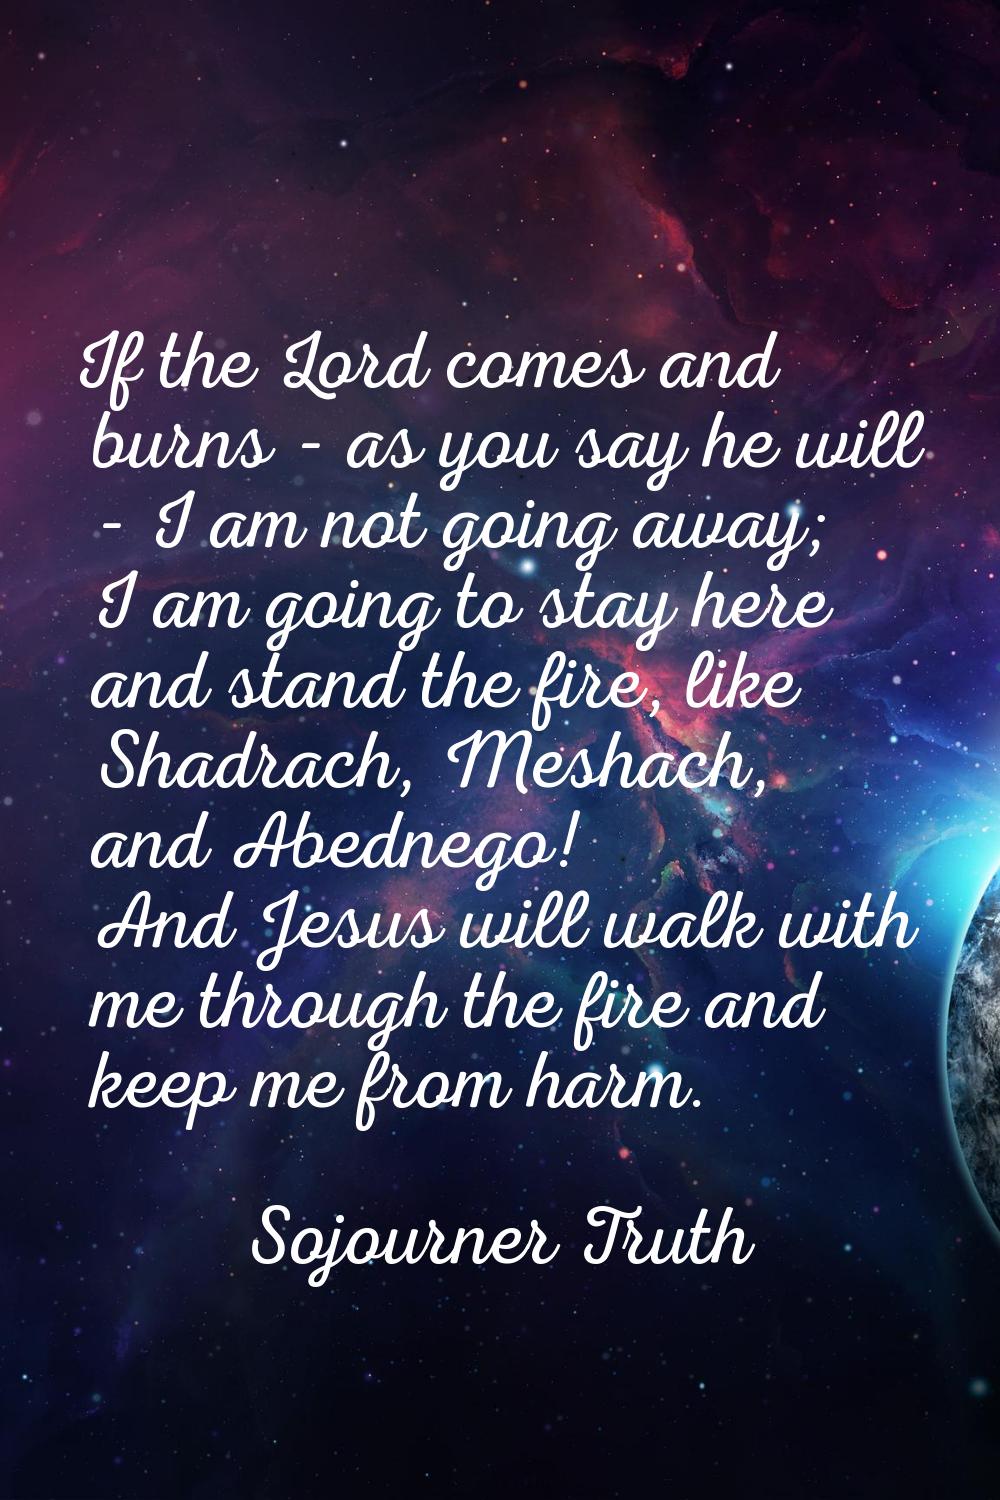 If the Lord comes and burns - as you say he will - I am not going away; I am going to stay here and